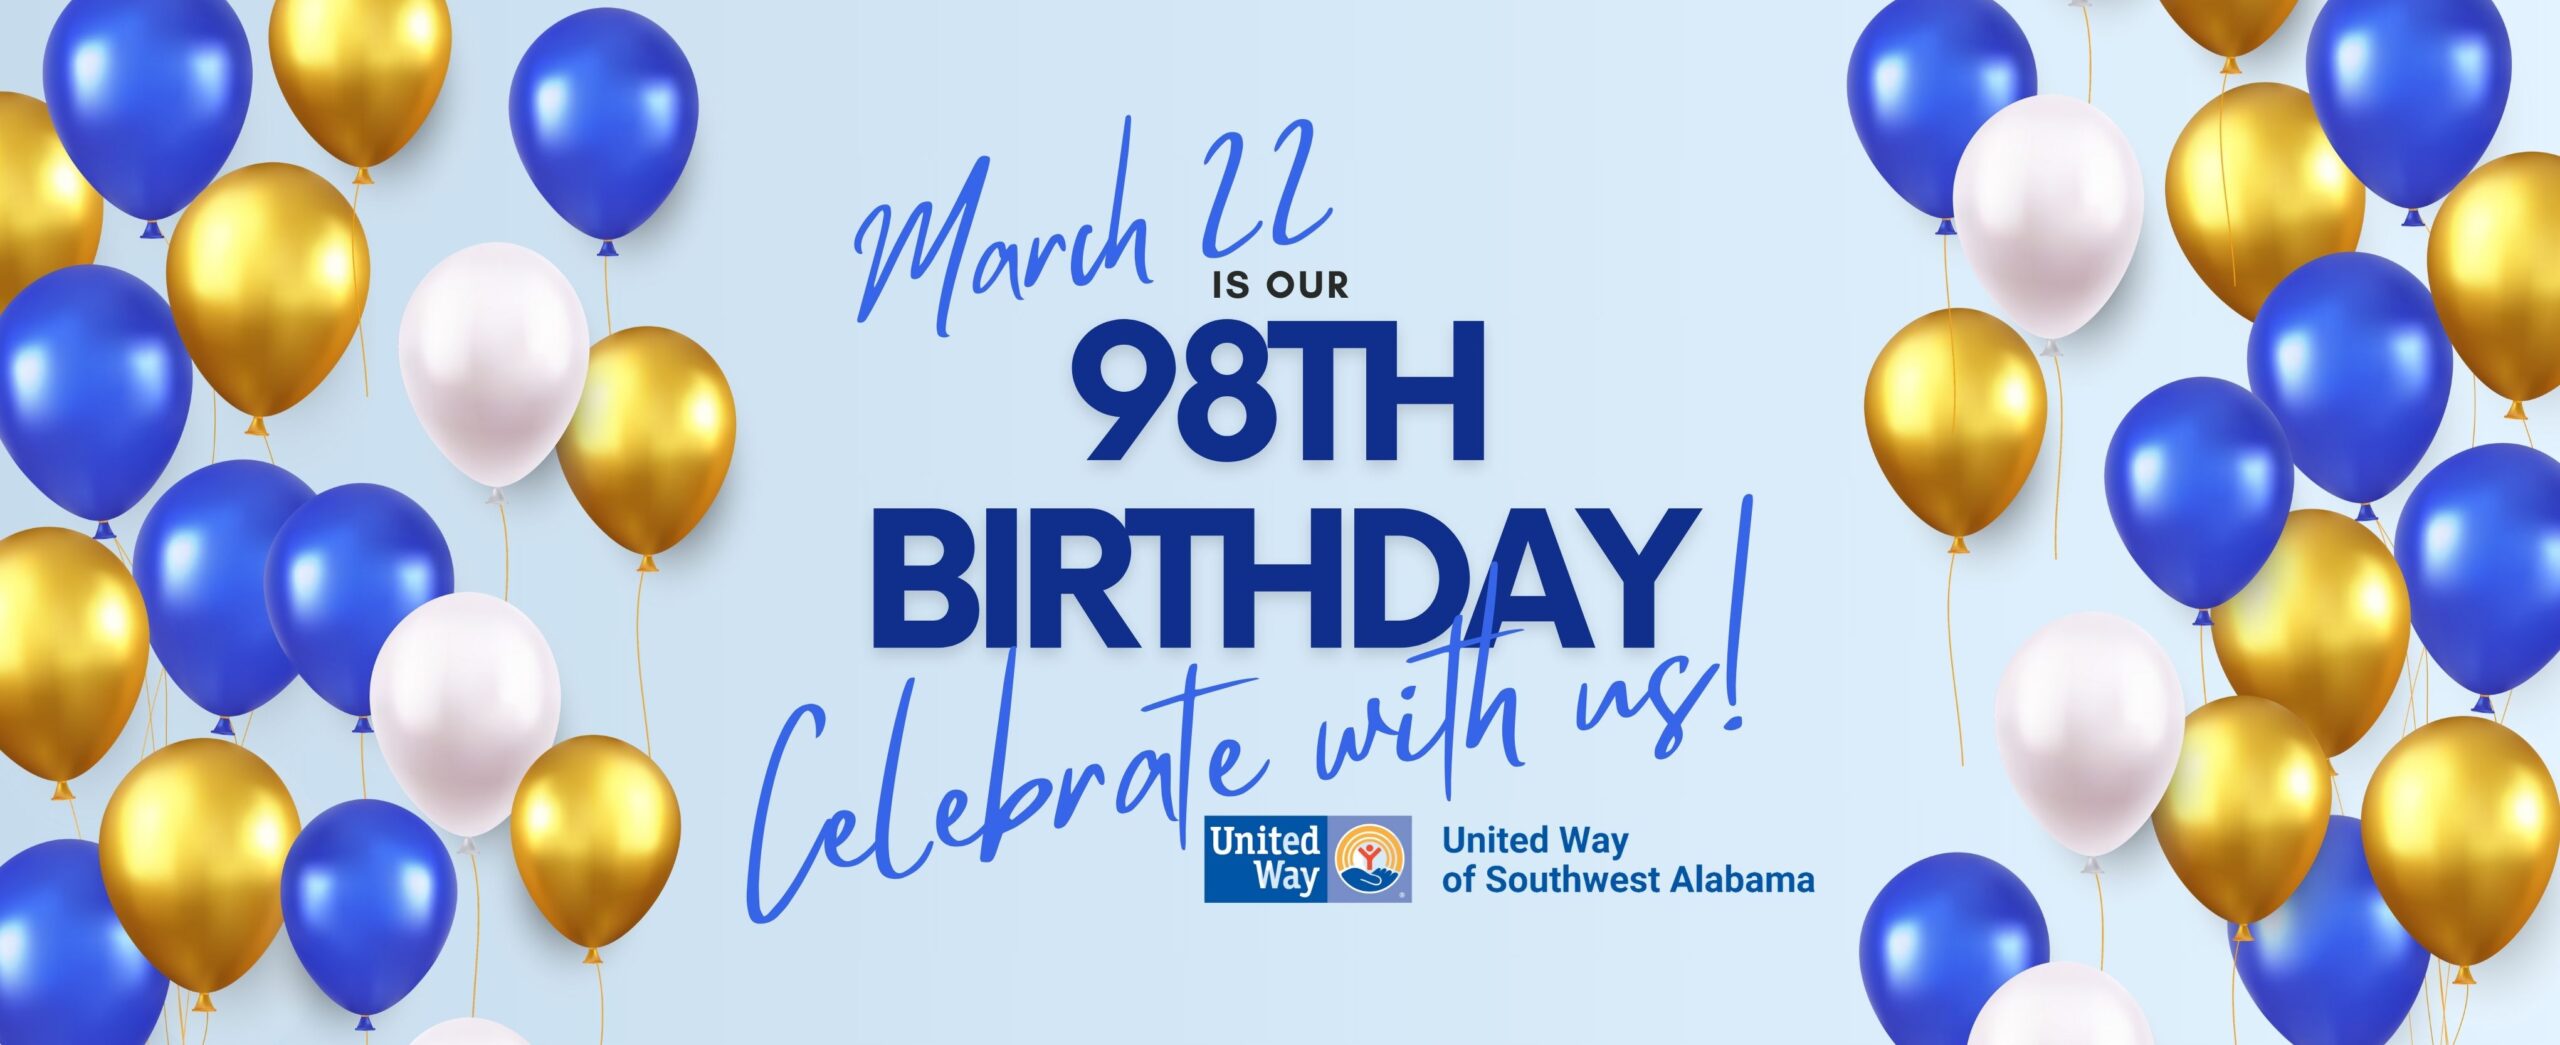 March 22 is our 98th Birthday. Celebrate with us! United Way logo and columns of blue and gold balloons